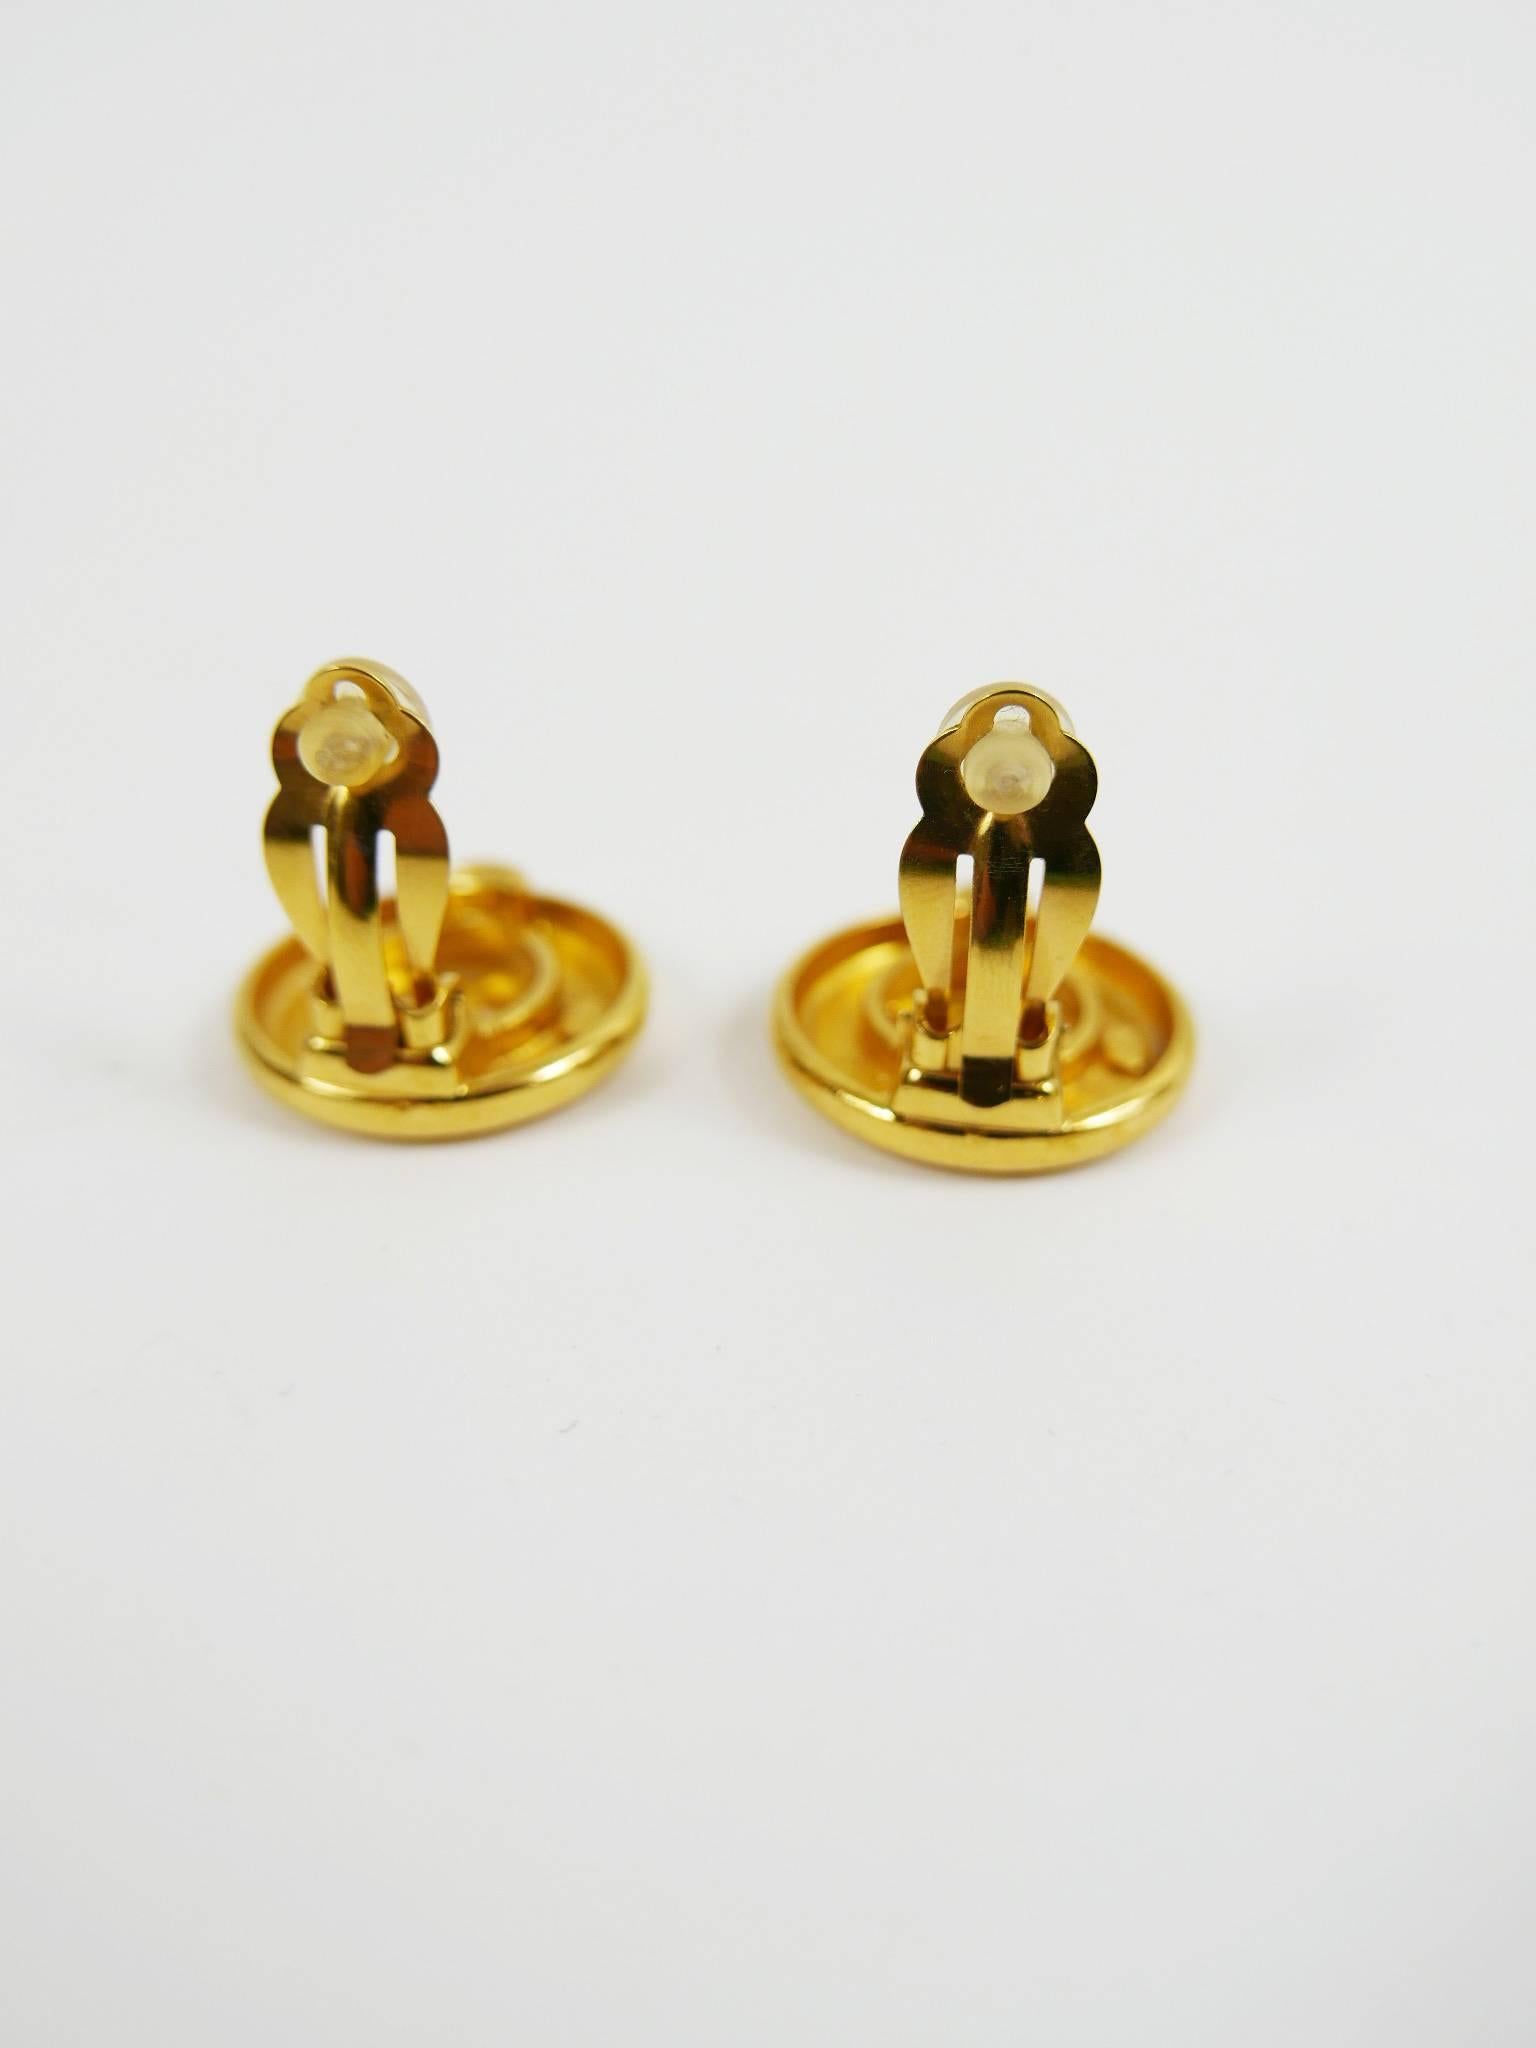 These gorgeous authentic vintage Chanel gold plated CC logo clip-on earrings are the must-have for a Chanel Fashion victim!!
It's included the original box.

Very good vintage condition

Brand: Chanel

Measurements:
Diameter 1 inch